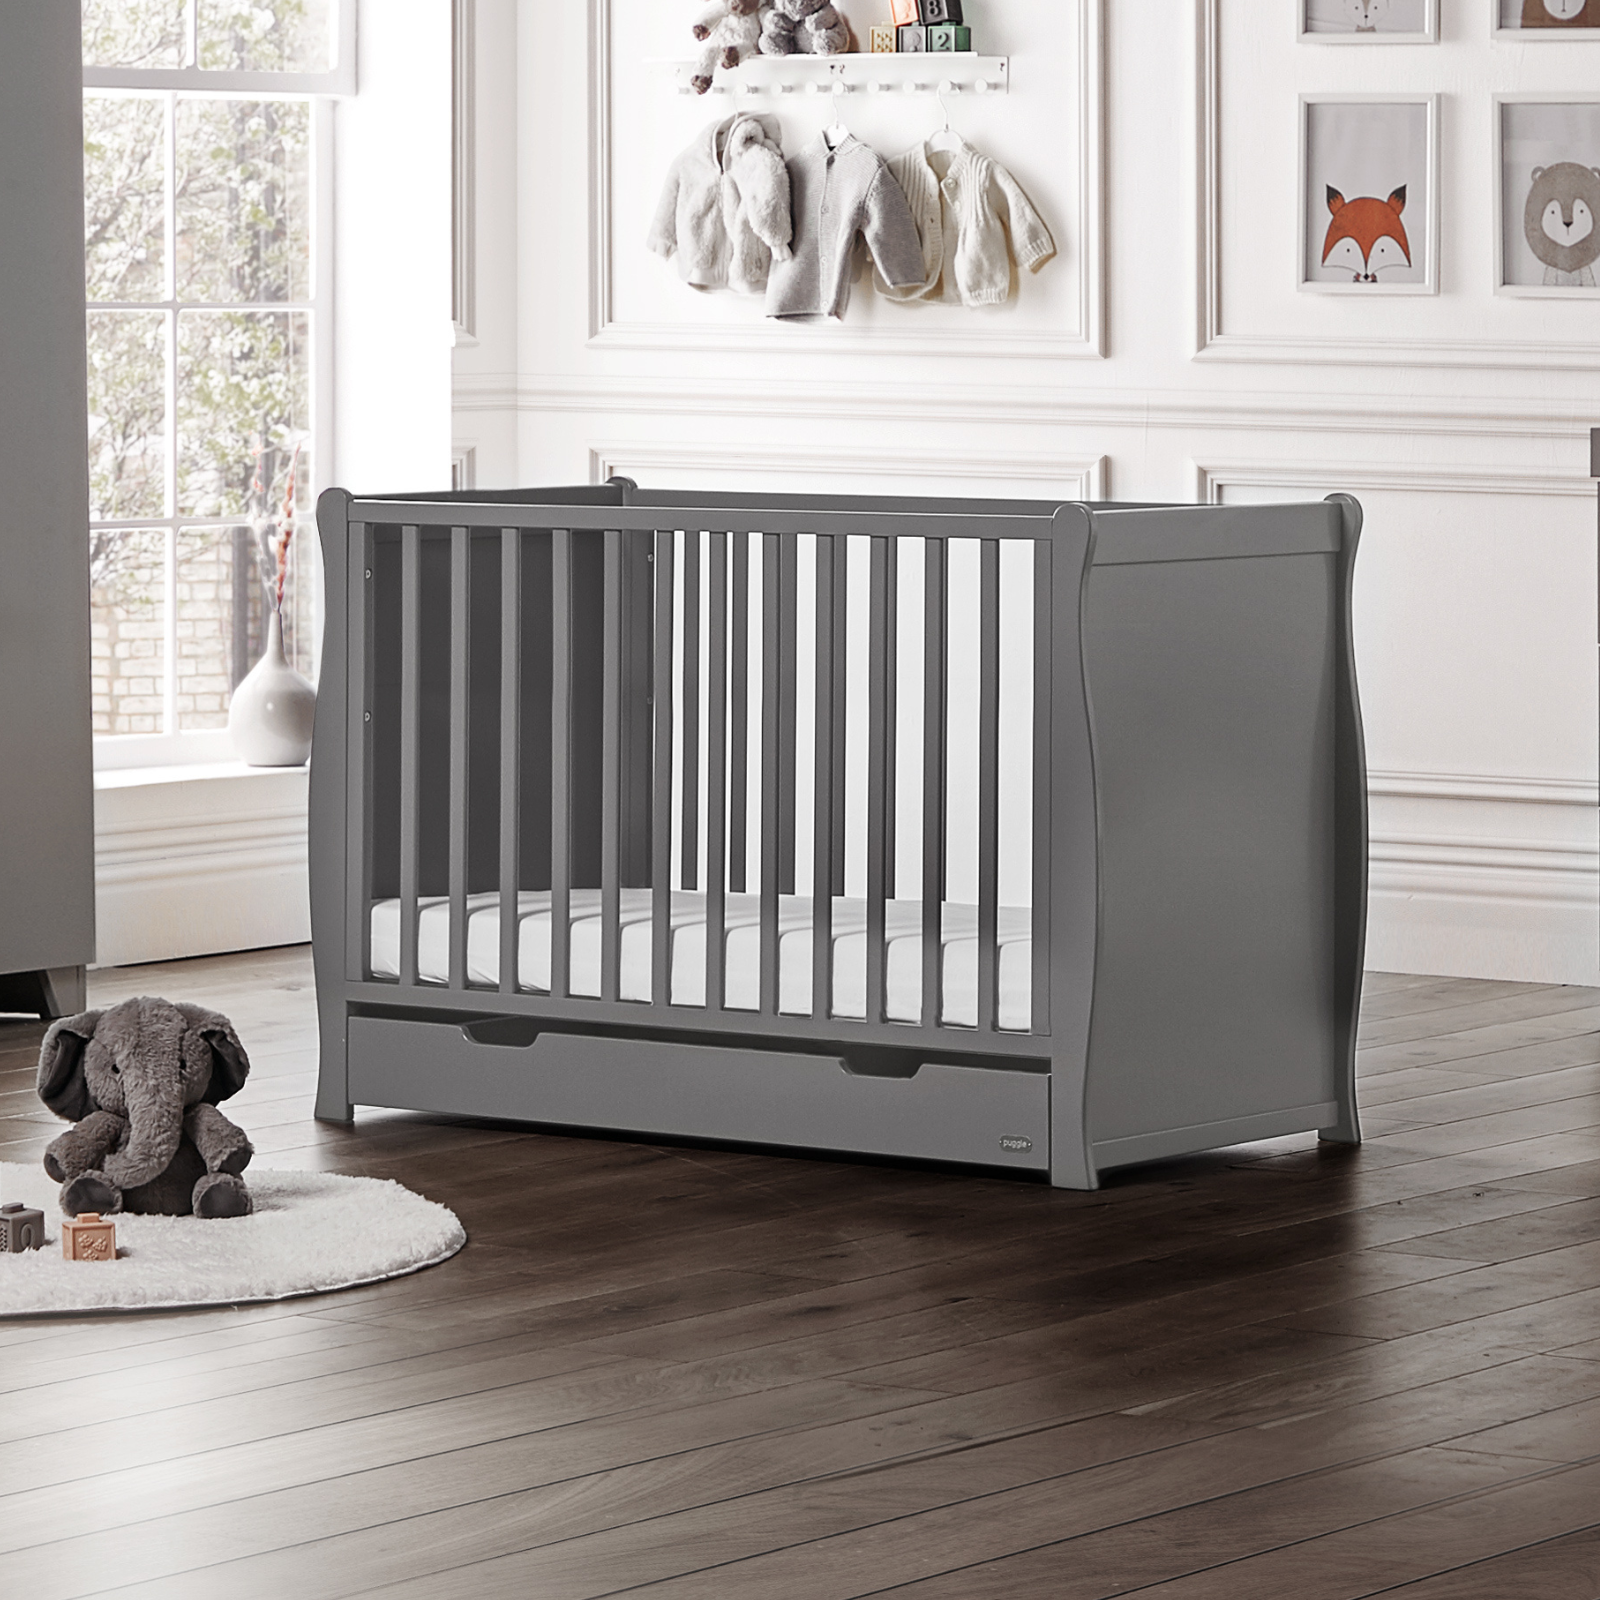 Puggle Chelford Sleigh Cot With Storage Drawer - Classic Grey